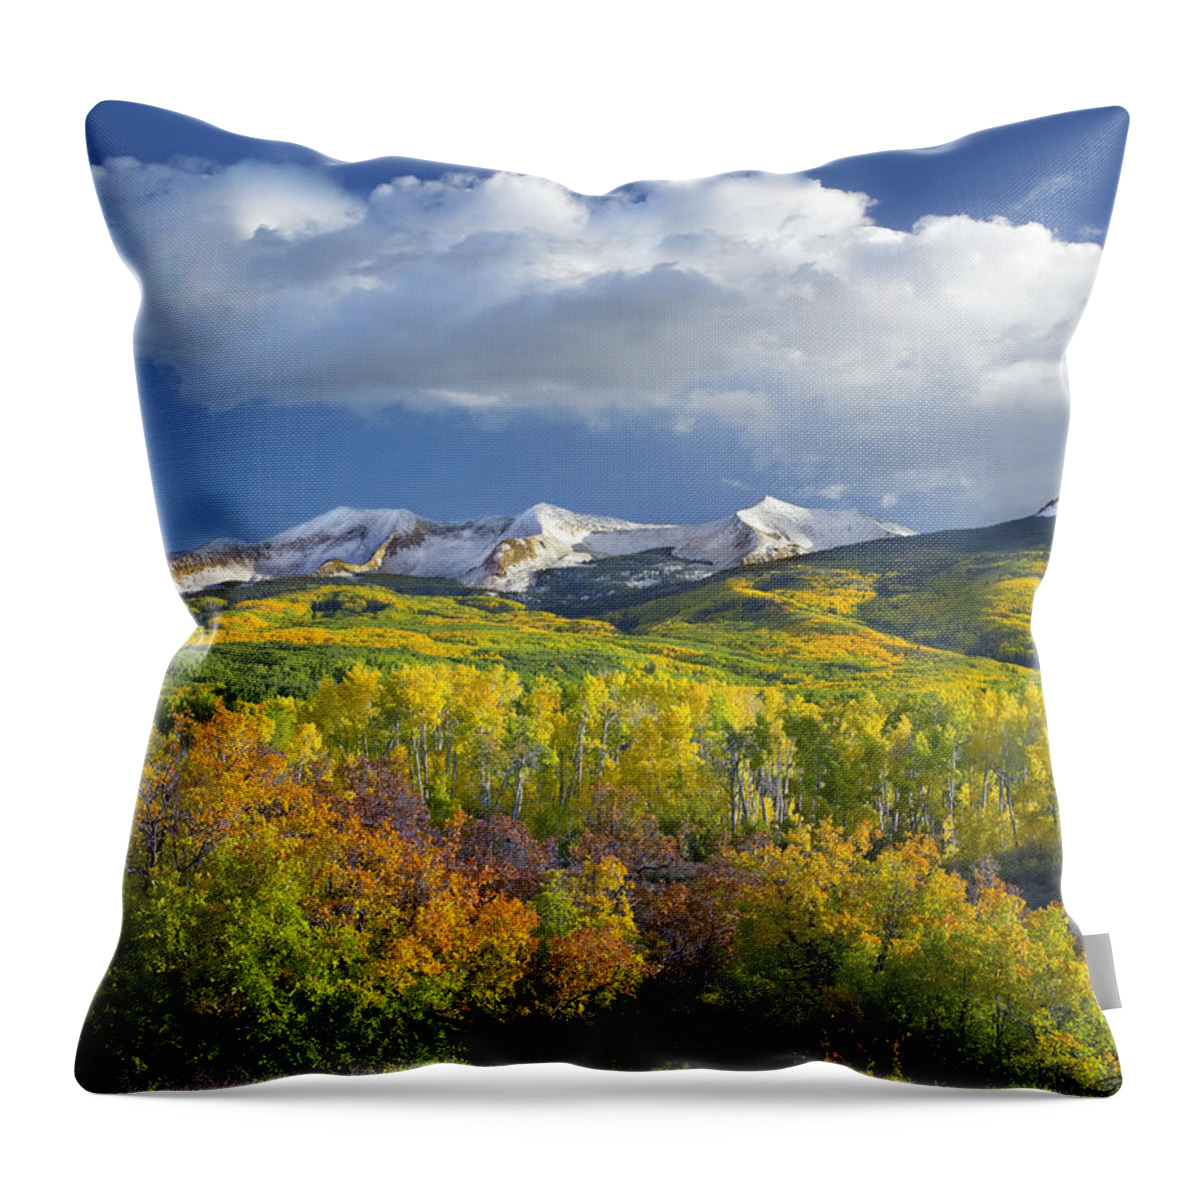 00175174 Throw Pillow featuring the photograph East Beckwith Mountain Flanked By Fall #1 by Tim Fitzharris